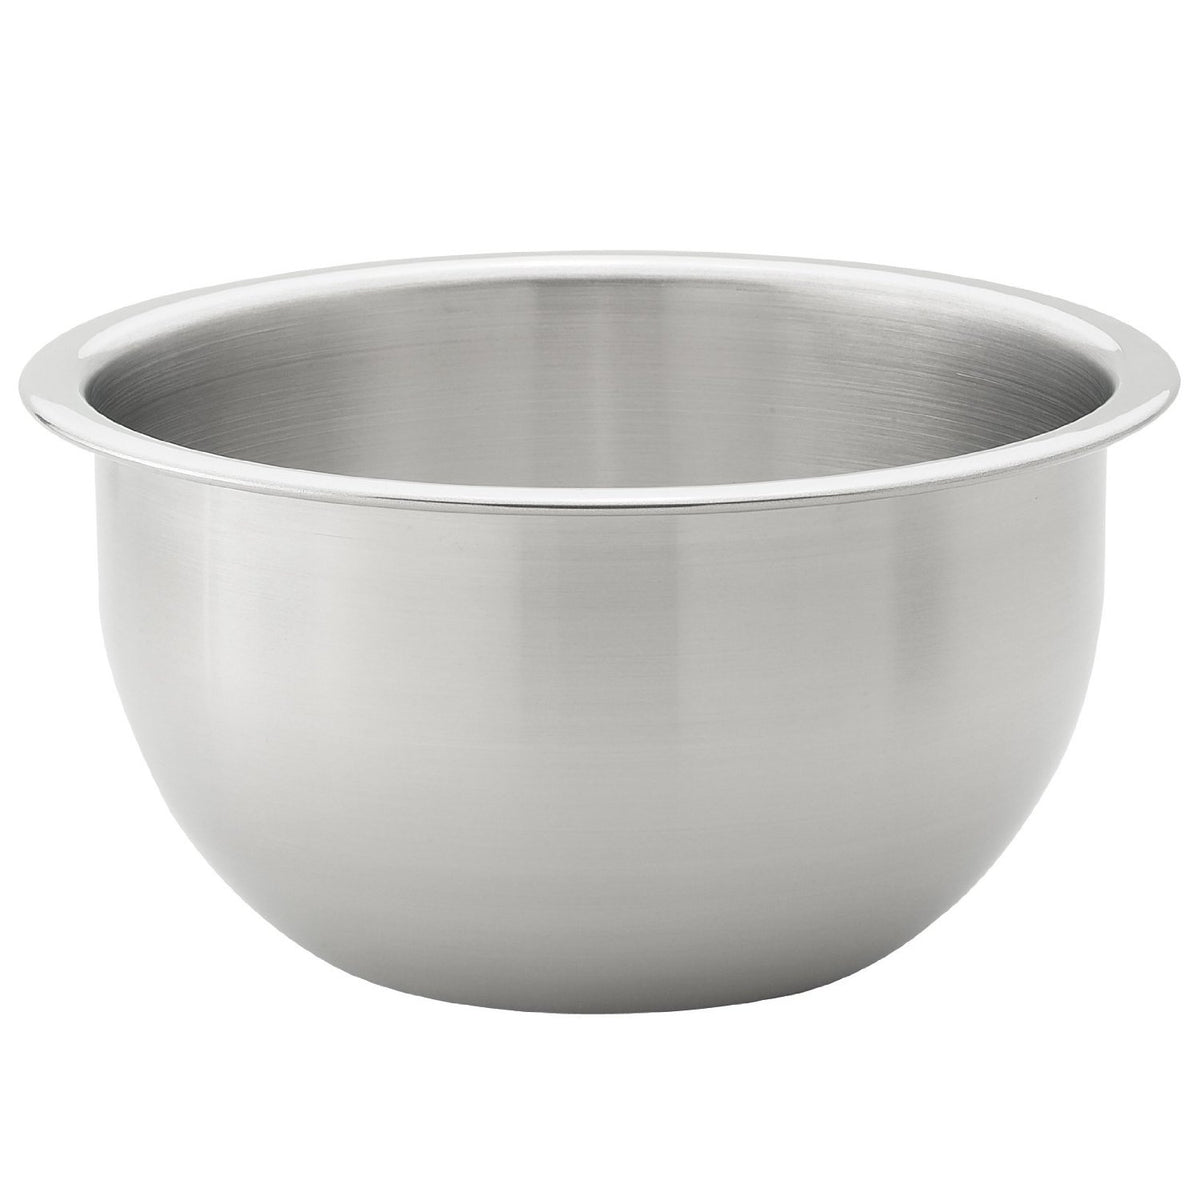 The Essentials 48002 Mixing Bowl, Stainless Steel, 4 Quarts